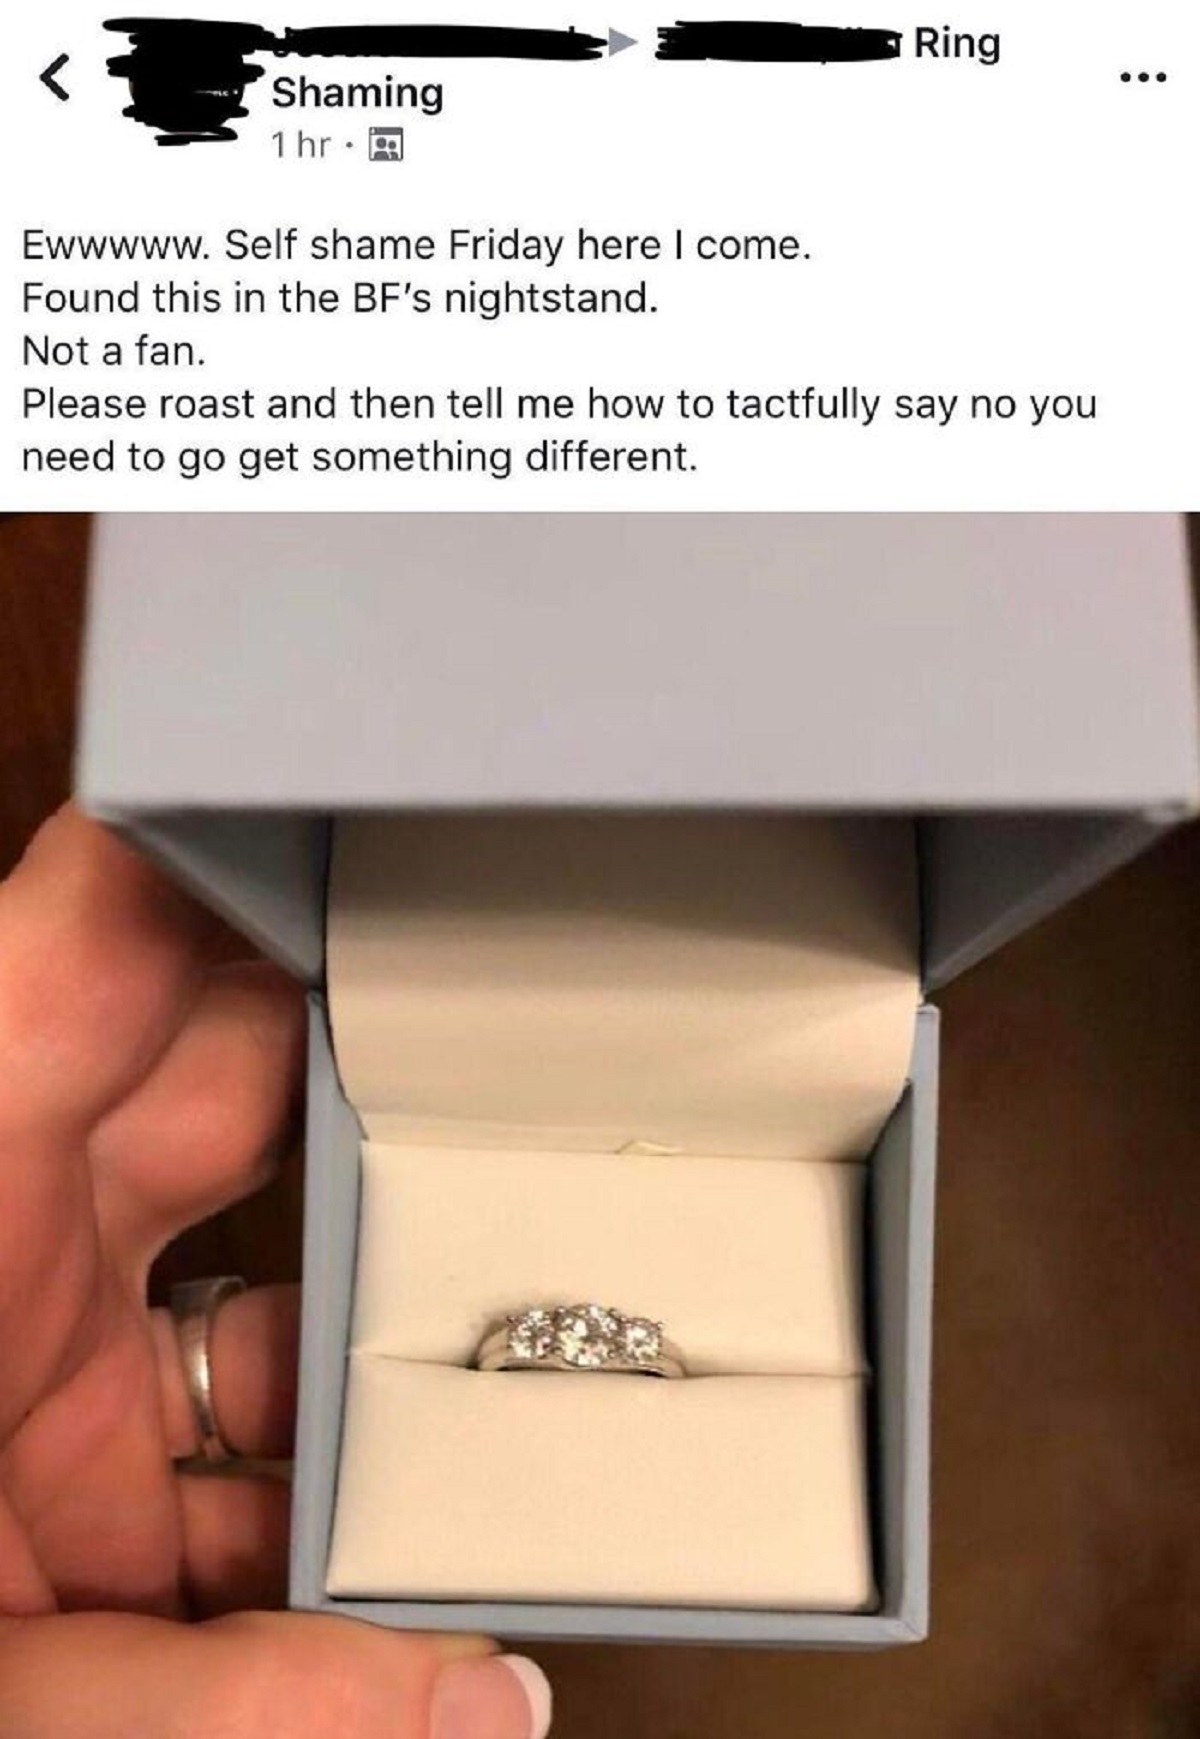 women complains about her engagement ring - Ring Shaming 1 hr Ewwwww. Self shame Friday here I come. Found this in the Bf's nightstand. Not a fan. Please roast and then tell me how to tactfully say no you need to go get something different.